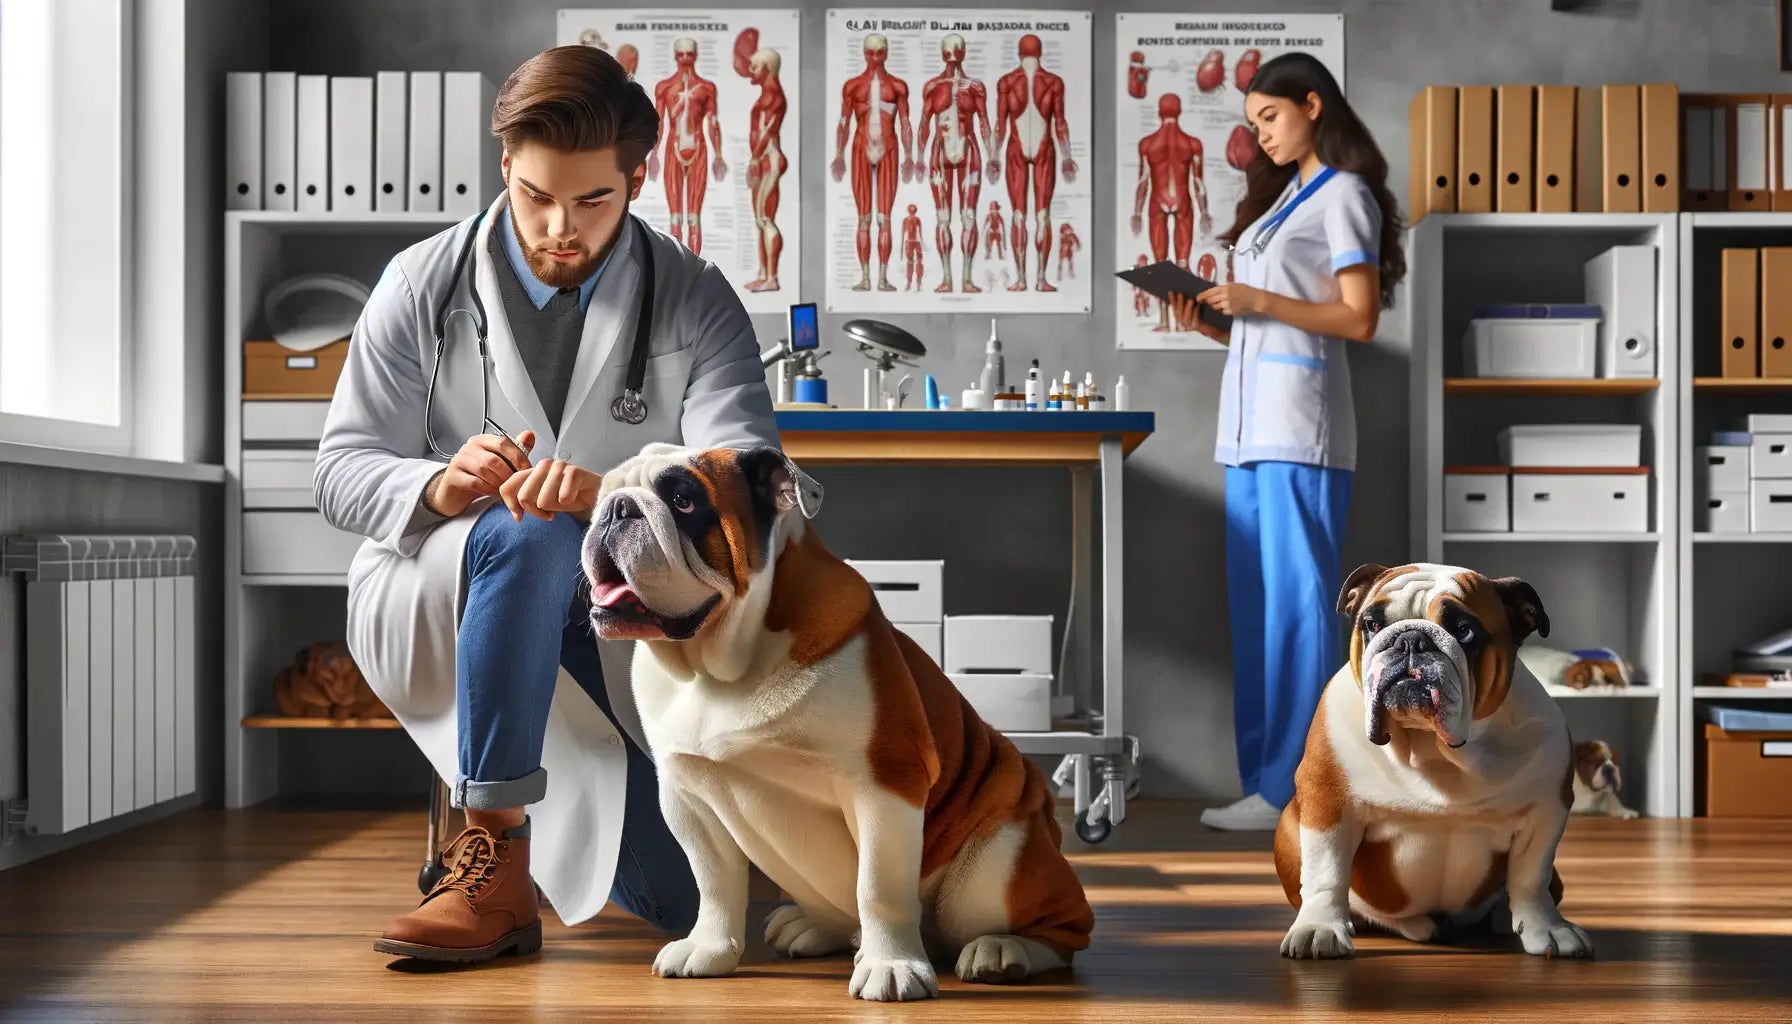 Image showing an Olde English Bulldogge being examined by a veterinarian inside a veterinarian's office, checking its joints for agility and muscle.